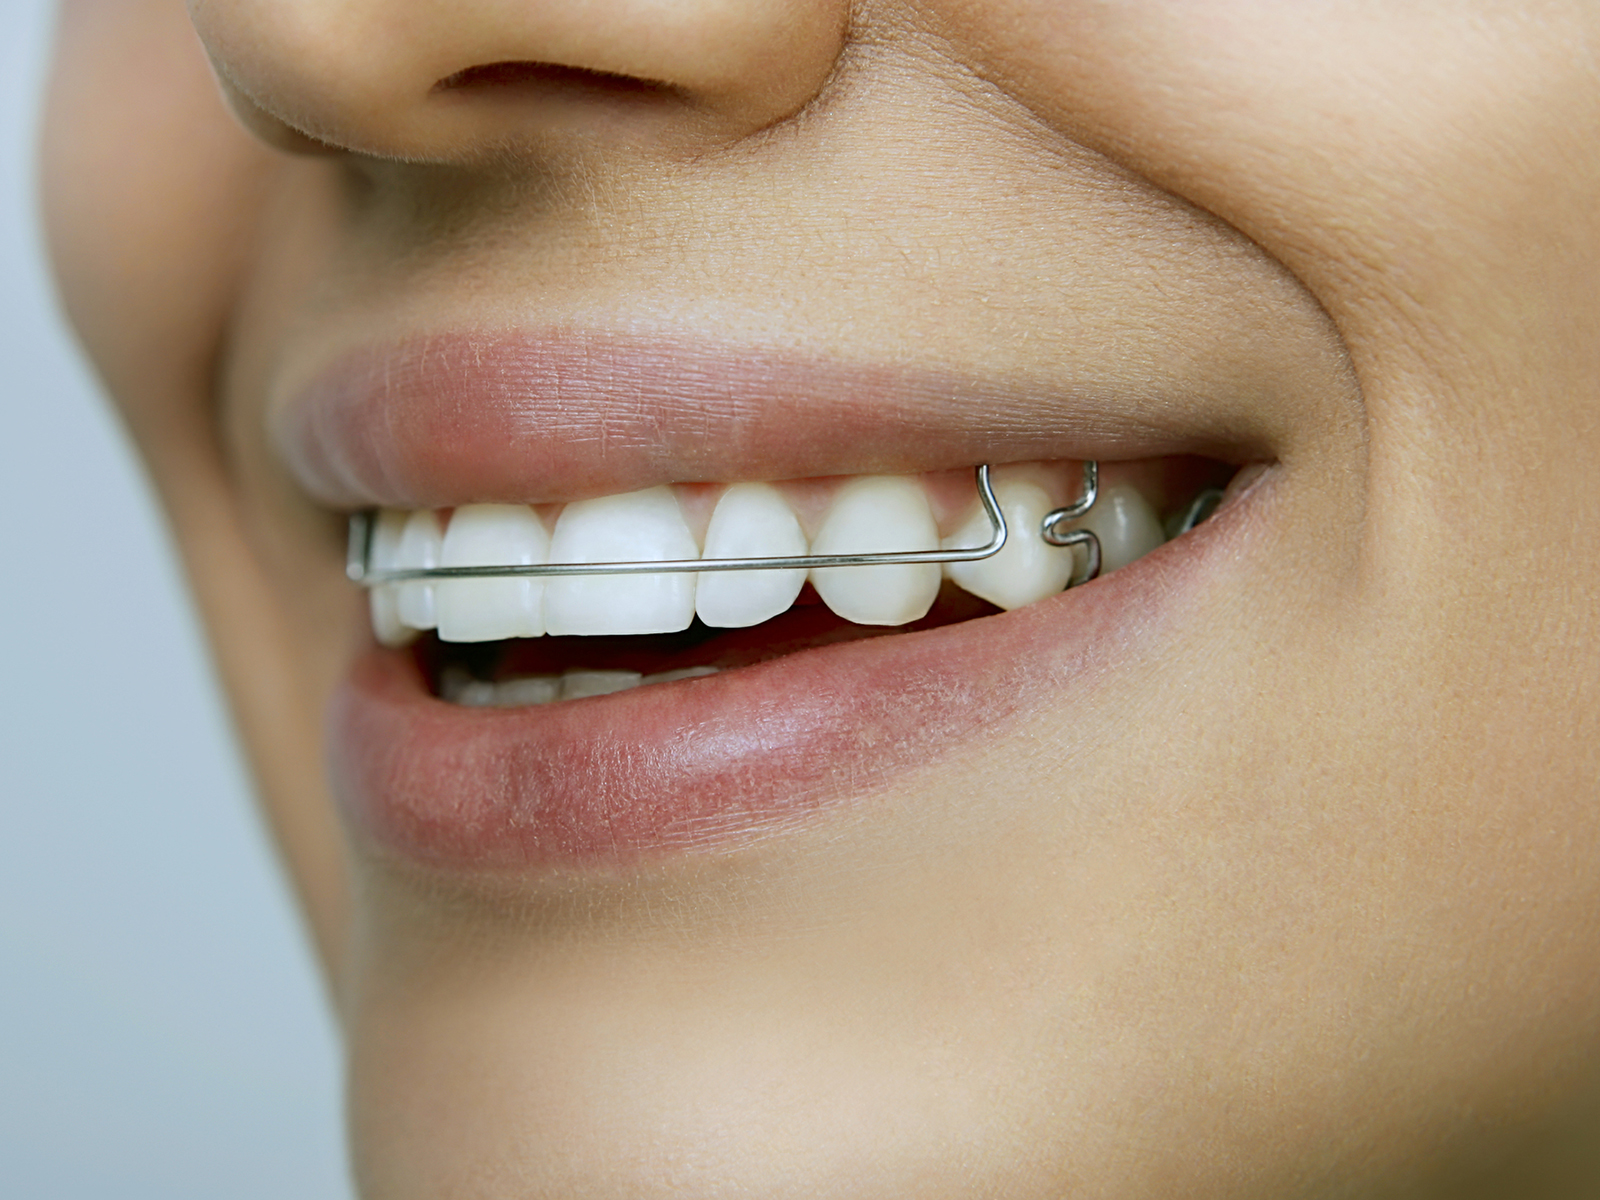 Can wearing retainers move teeth back?